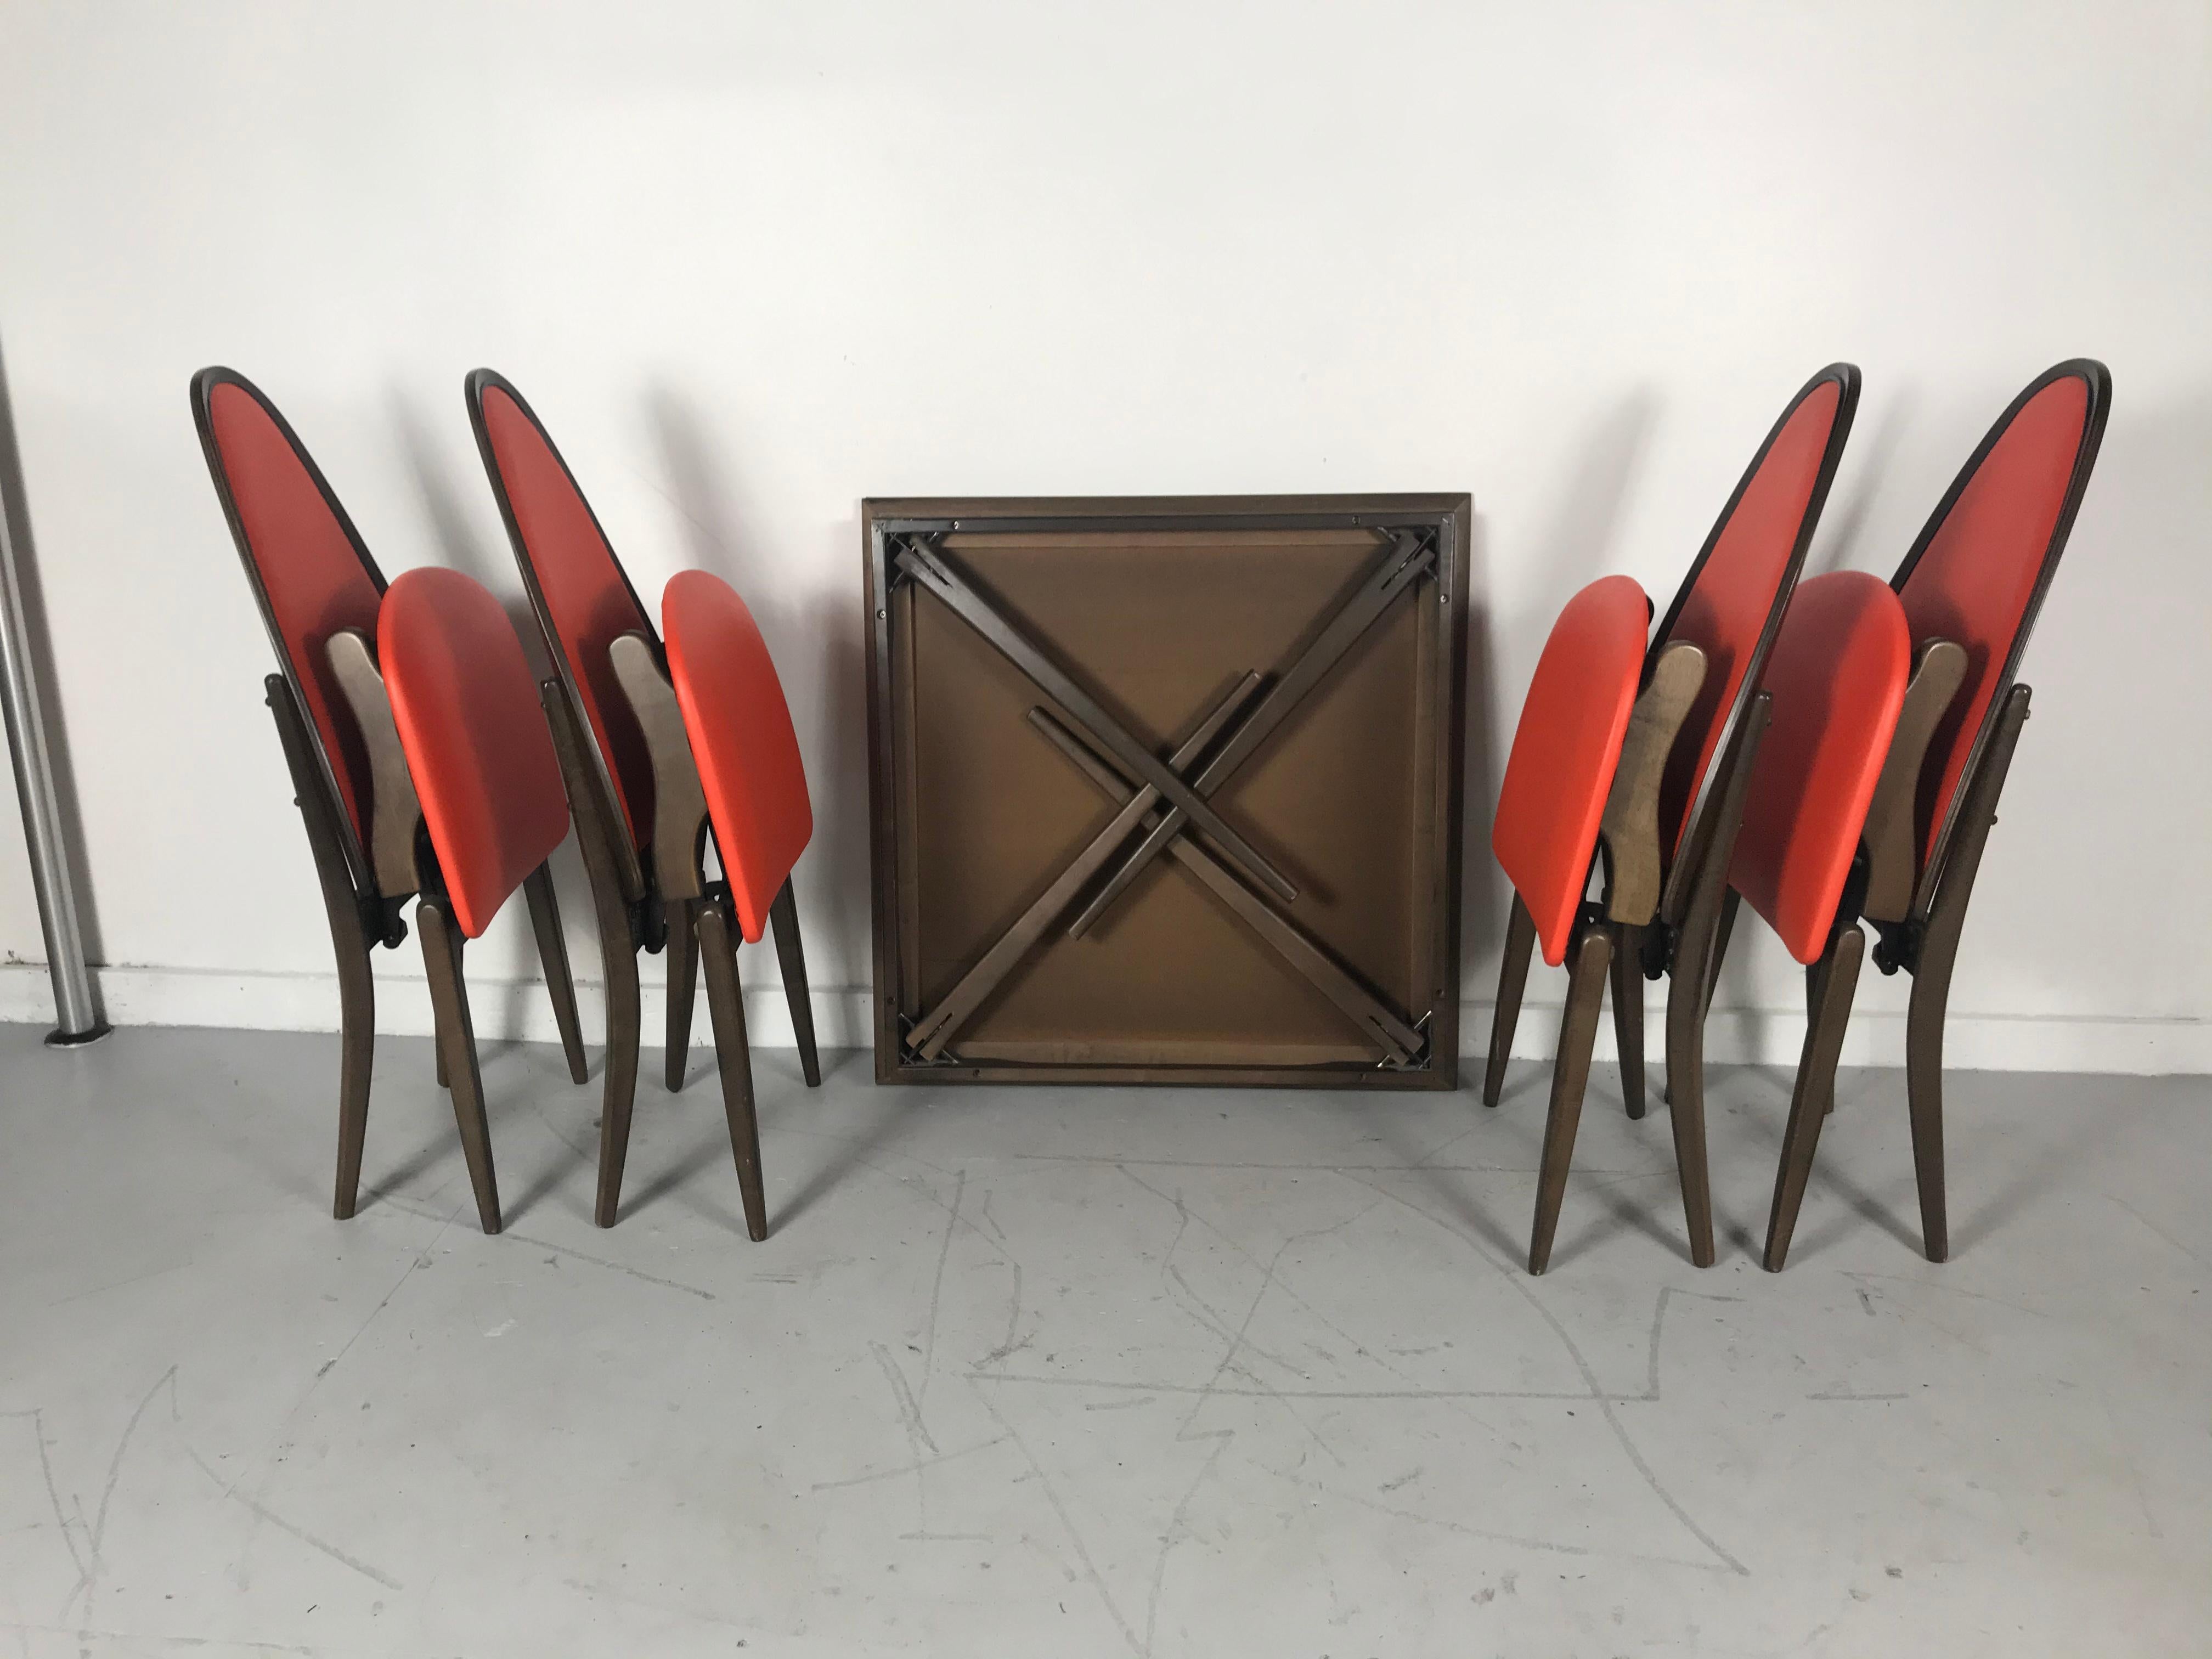 American Elegant Stylized Folding Table and Chairs Mfg. by Stakmore Furniture Co.